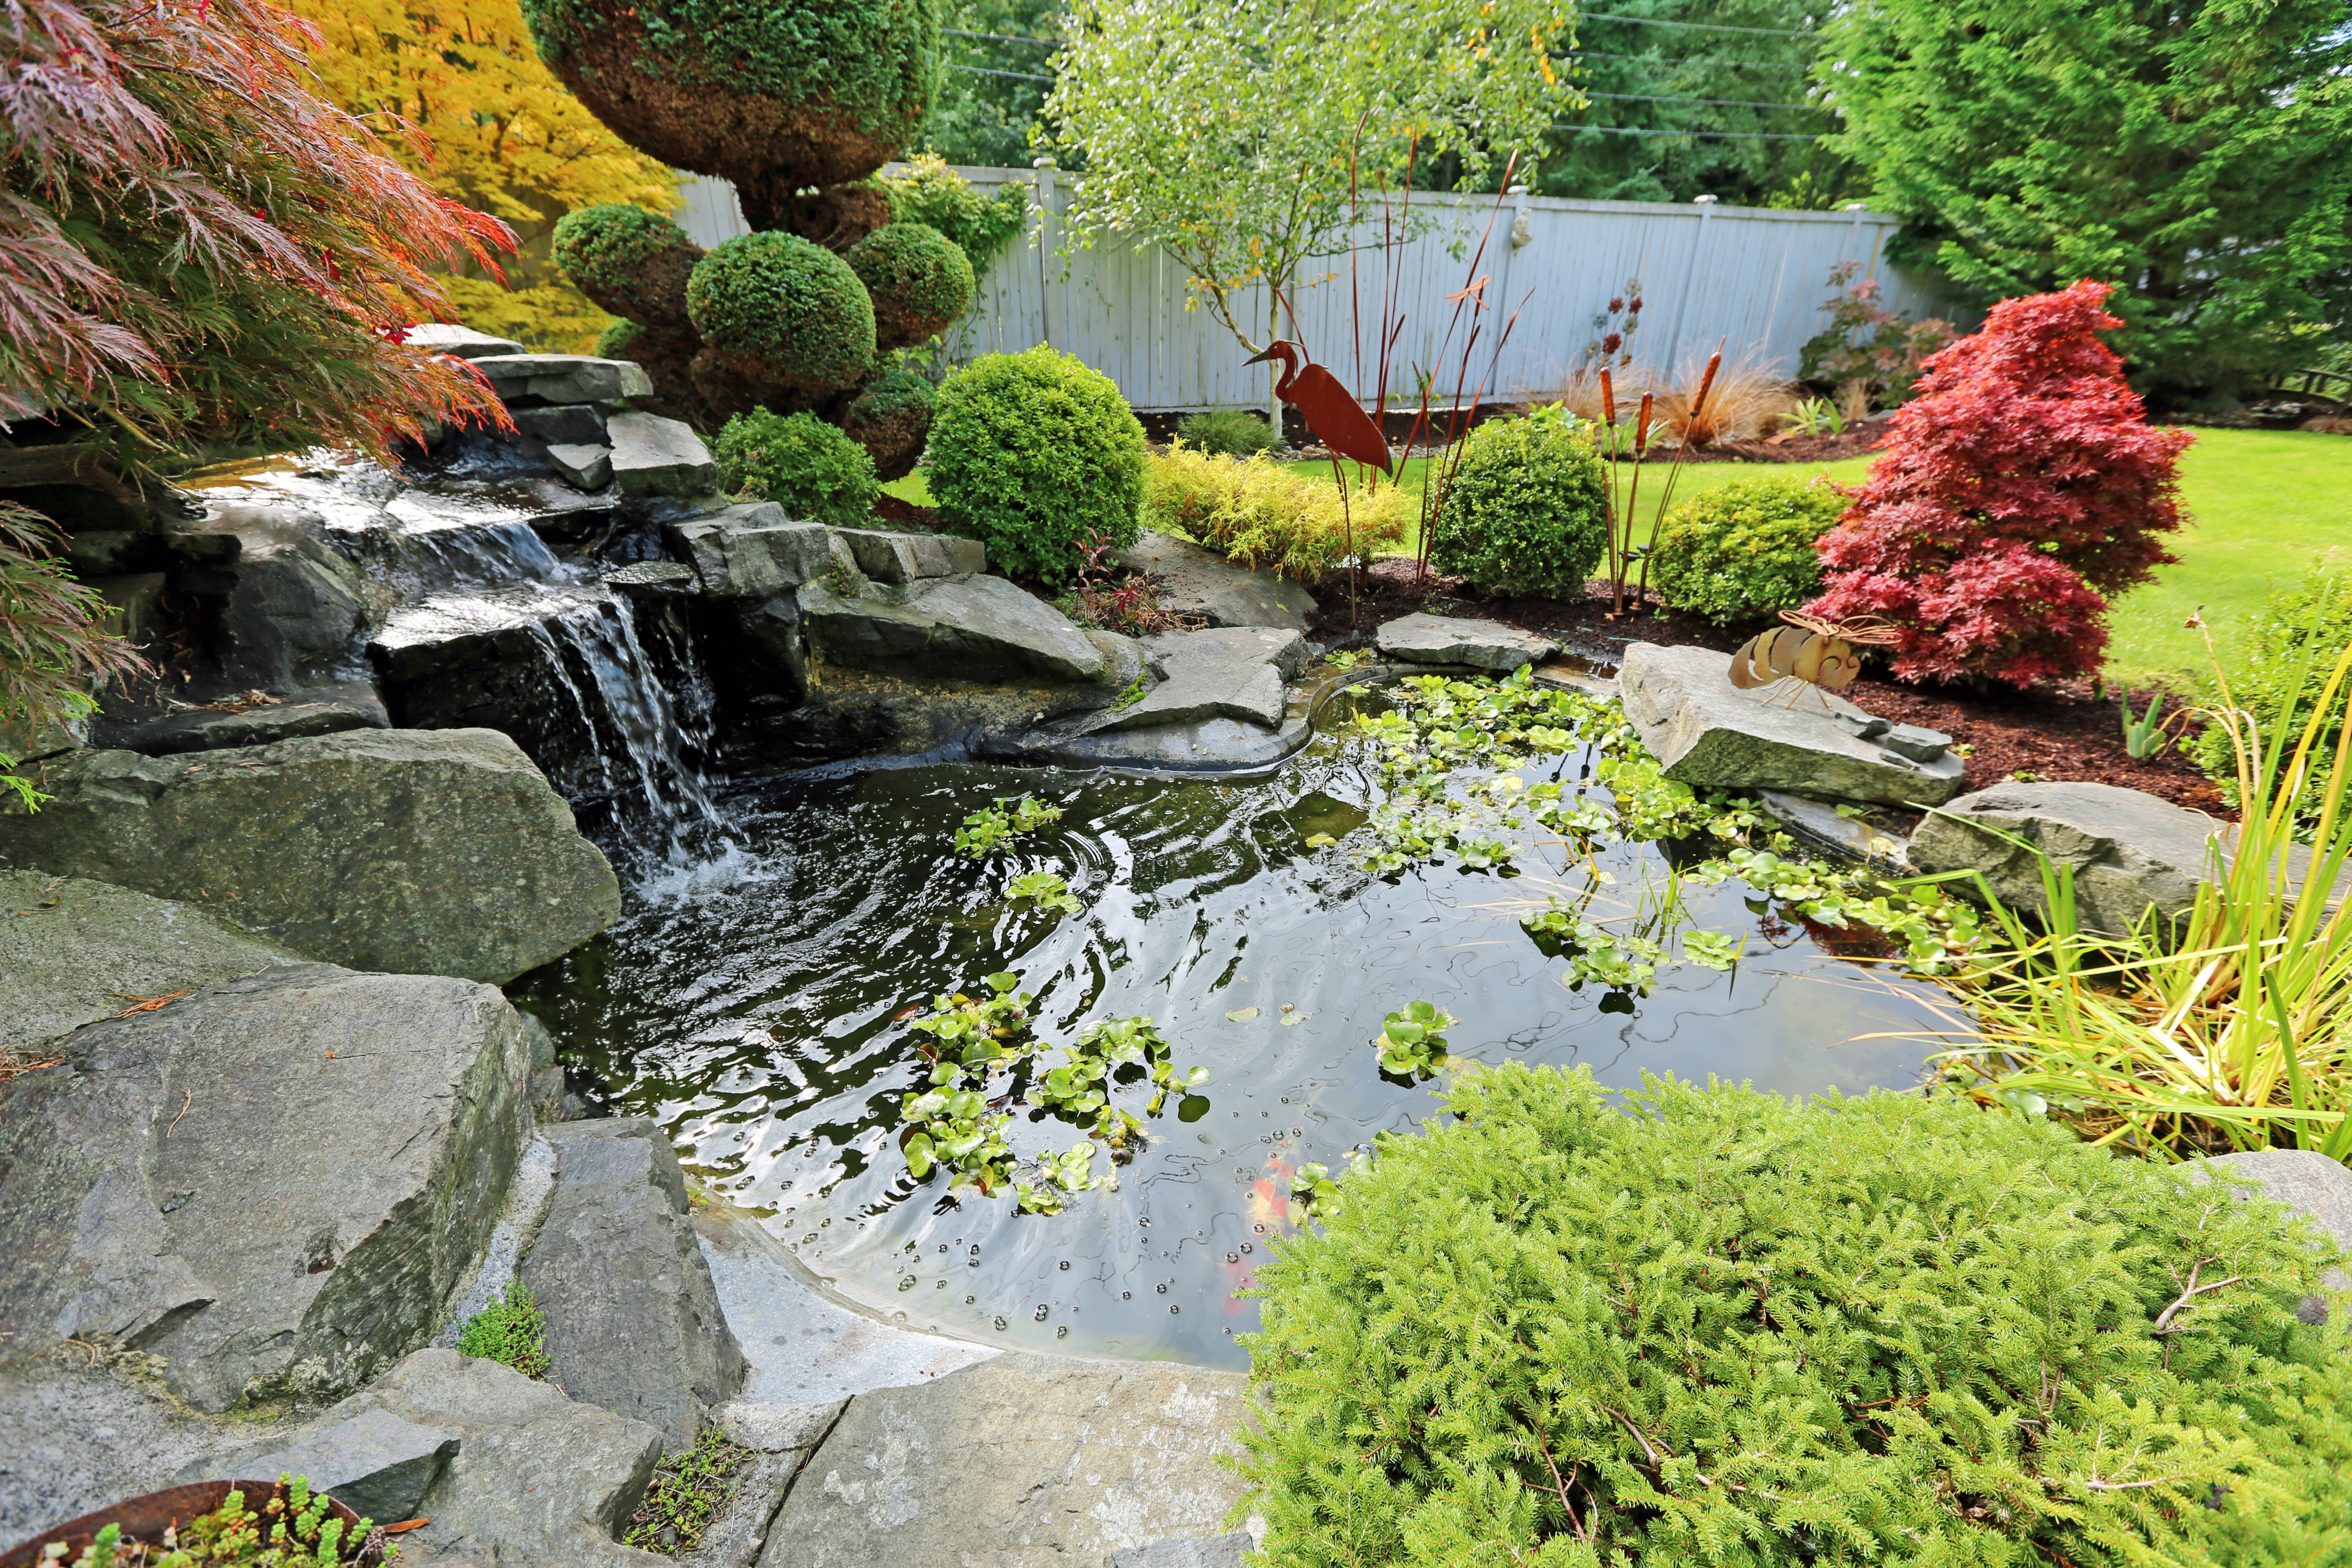 Tropical landscape design on backyard. View of small pond, trimmed bushes and small waterfall